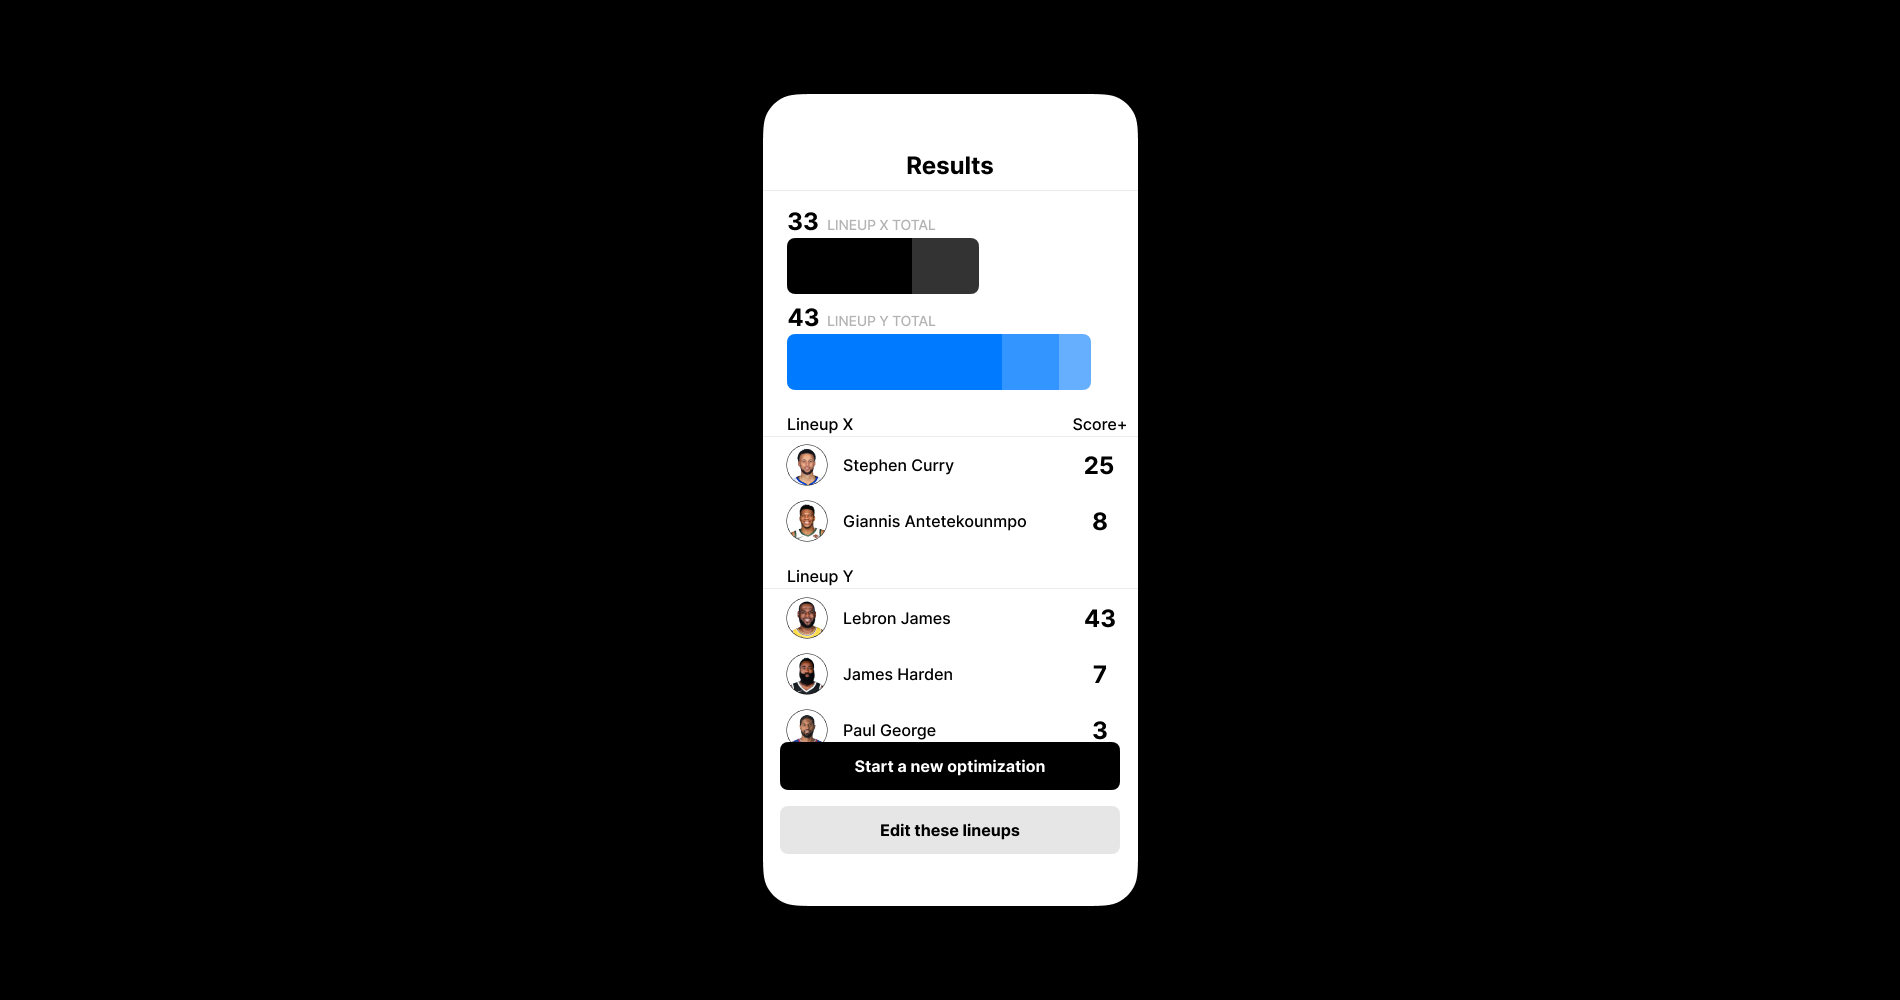 The app's results page with NBA player's Score+'s.